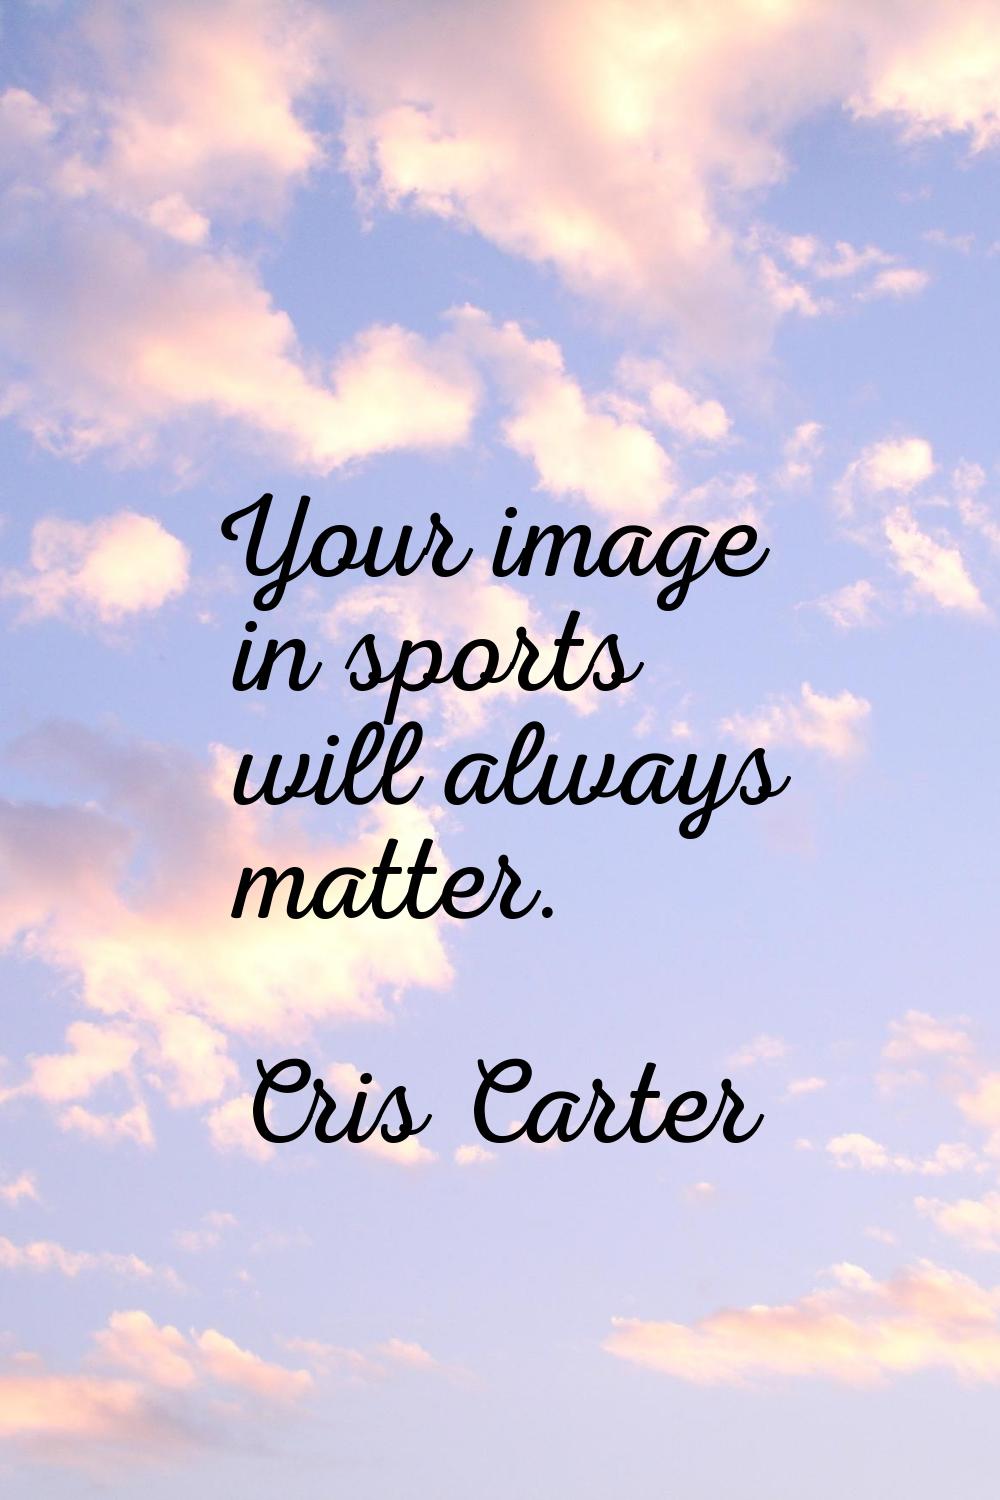 Your image in sports will always matter.